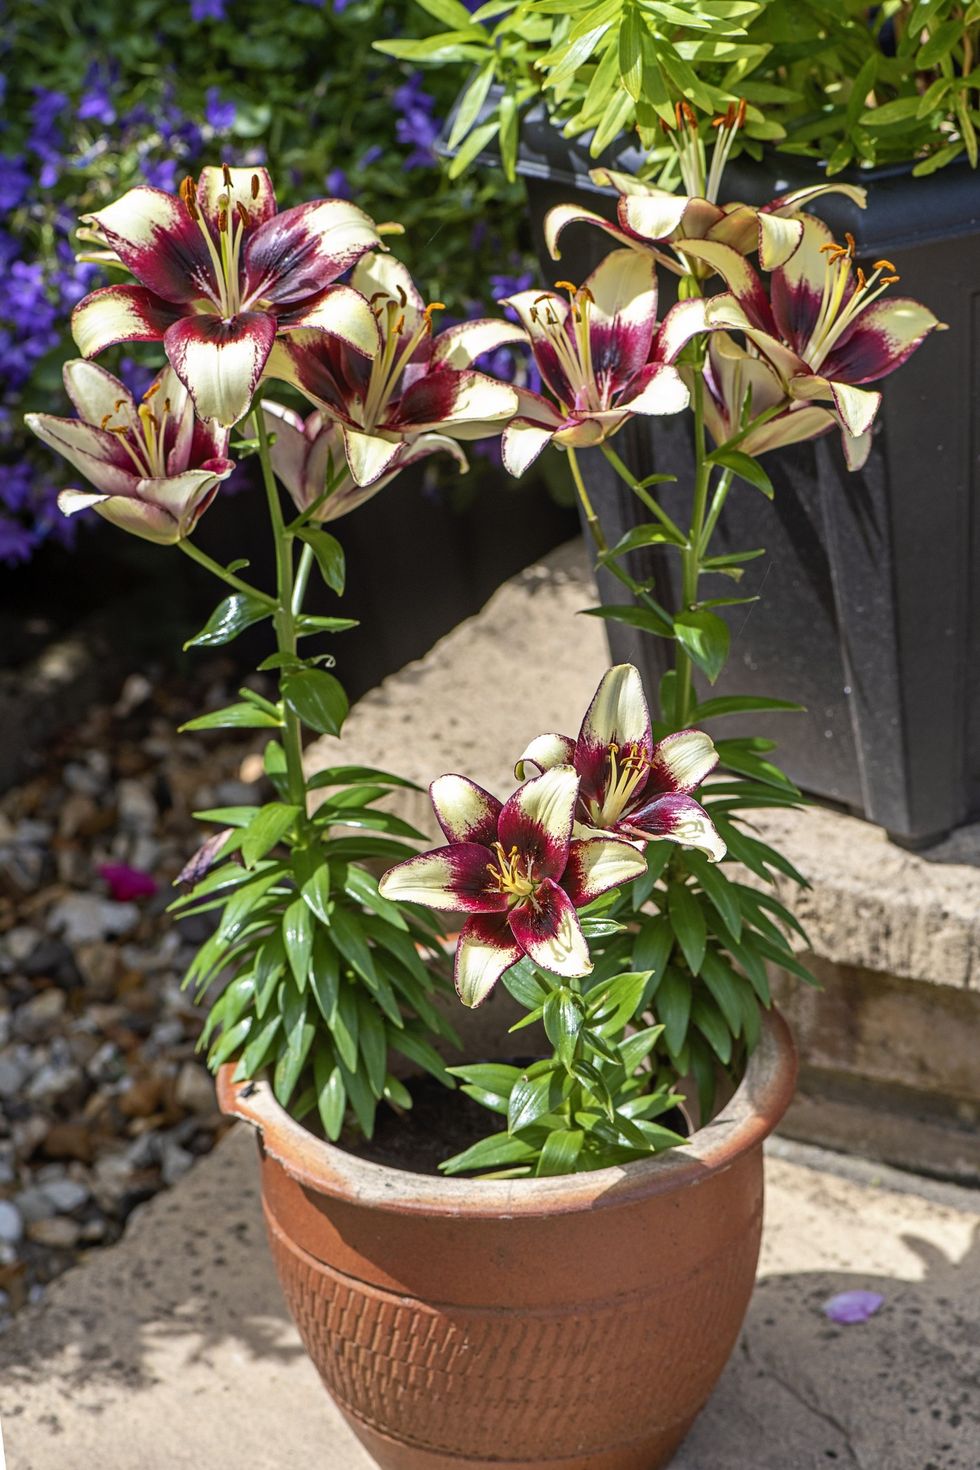 Lilies in a pot